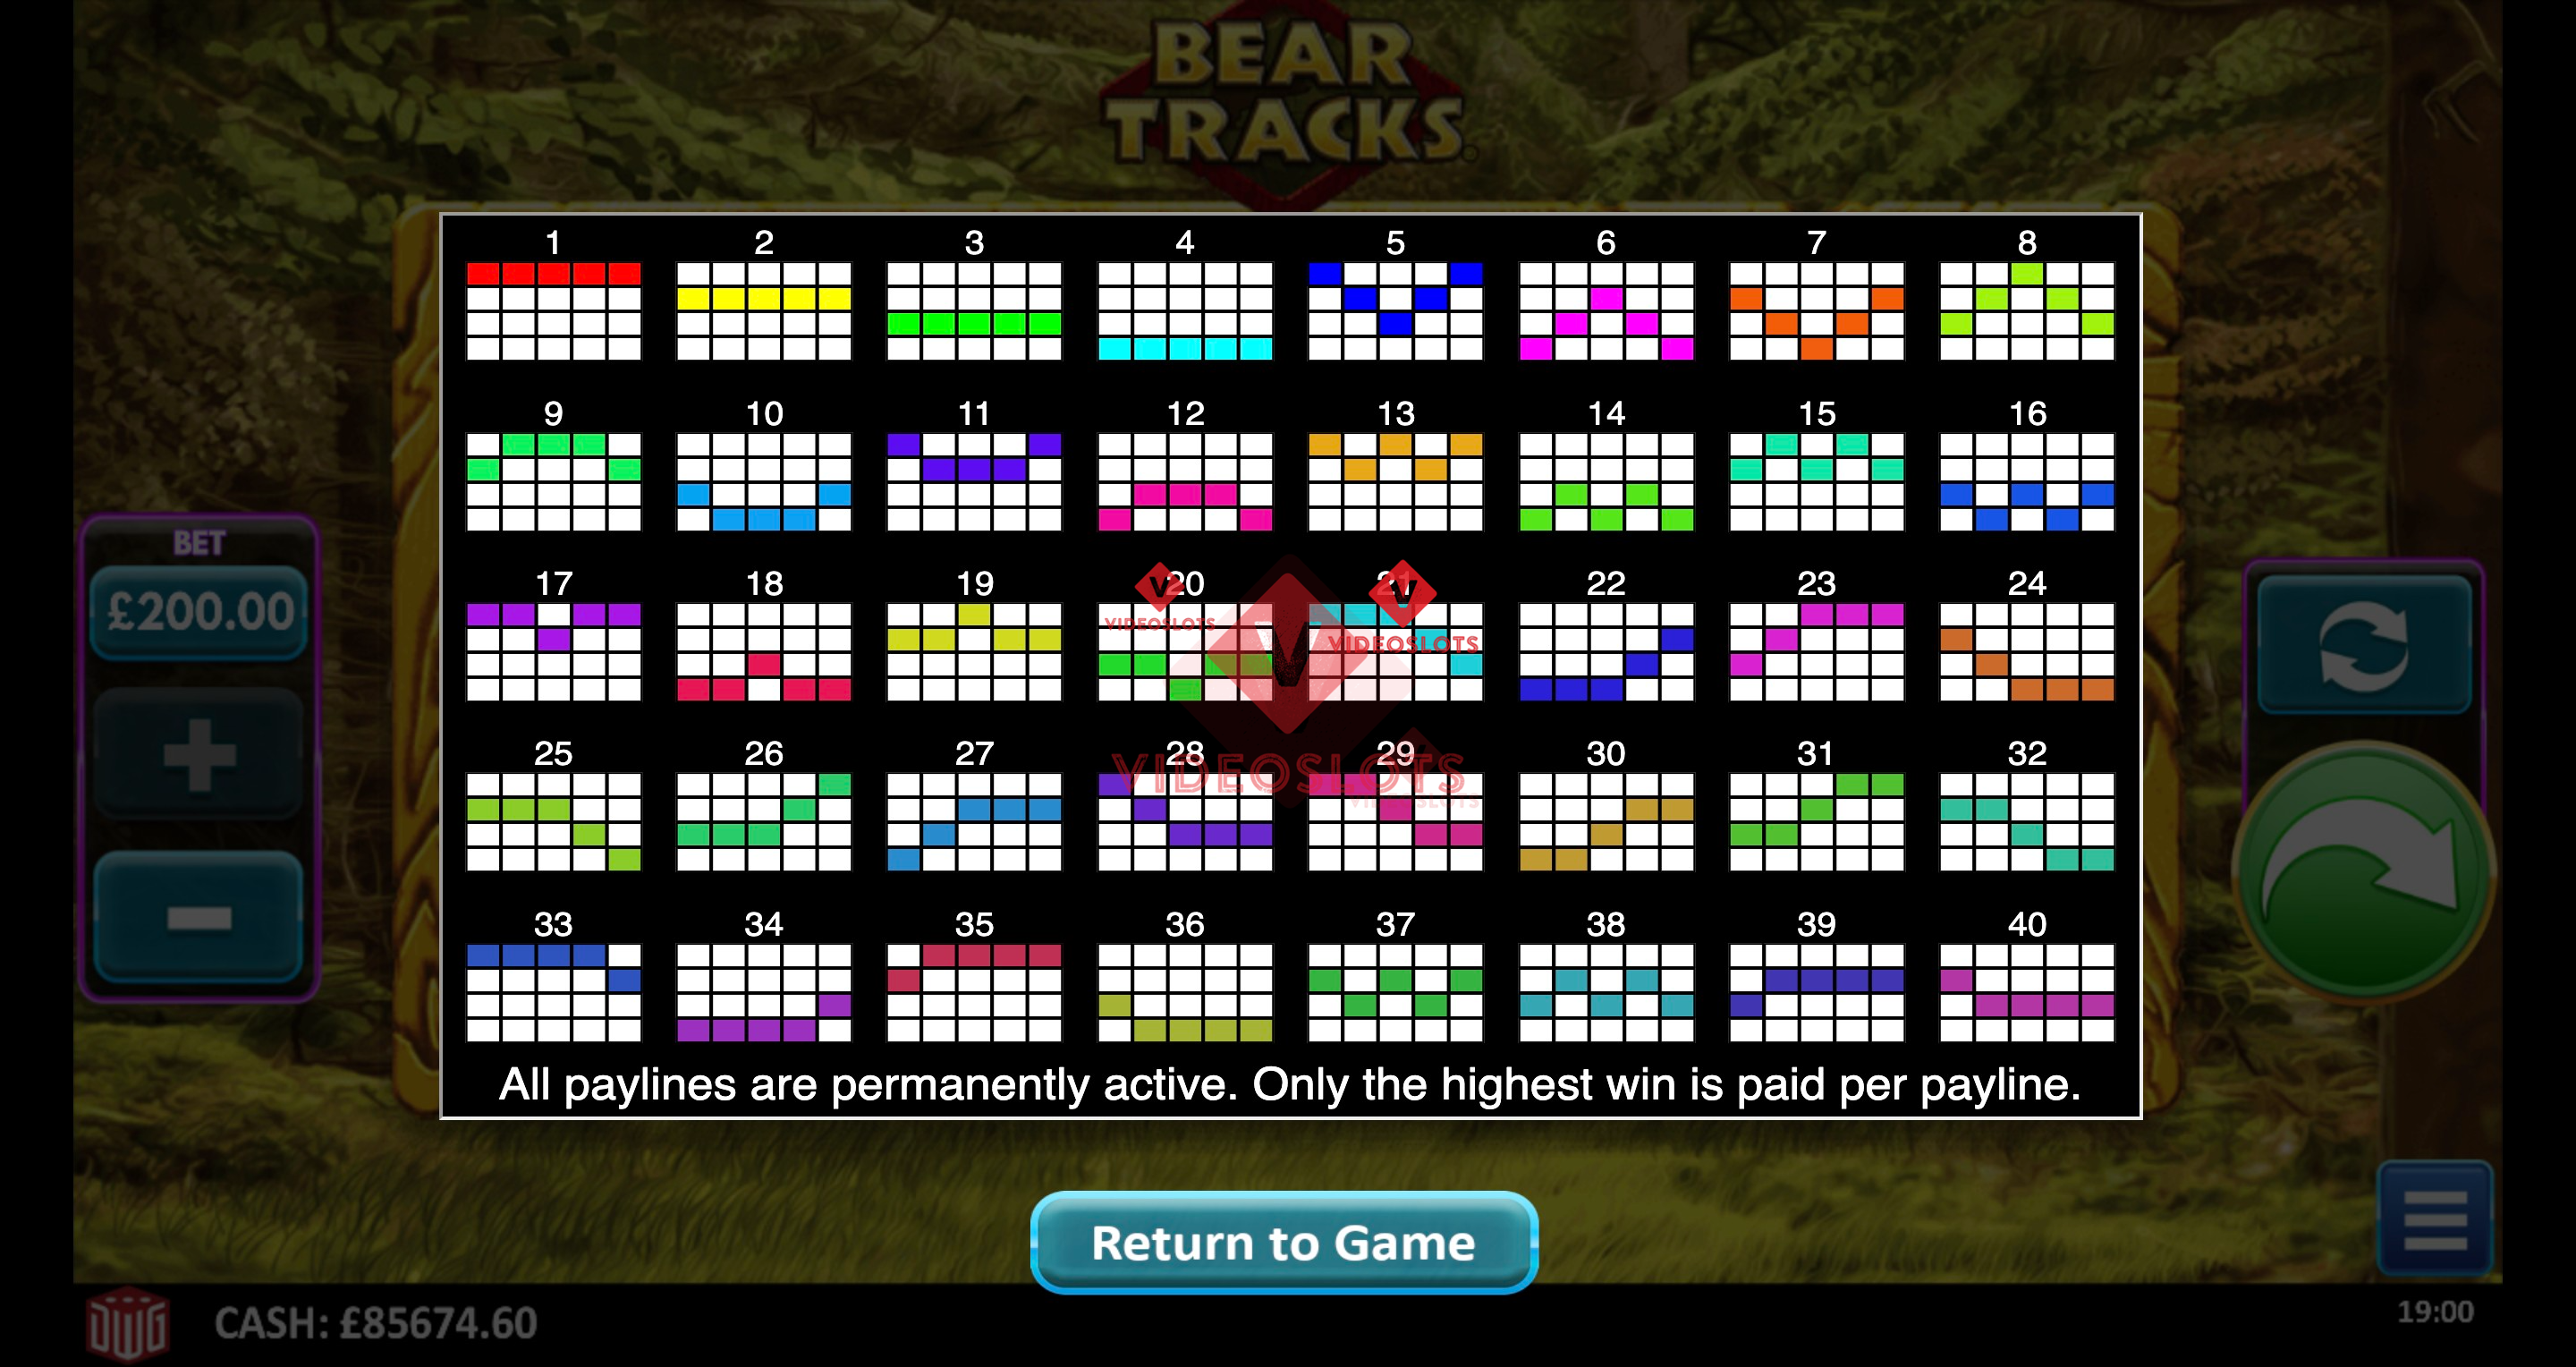 Pay Table for Bear Tracks slot from Greentube